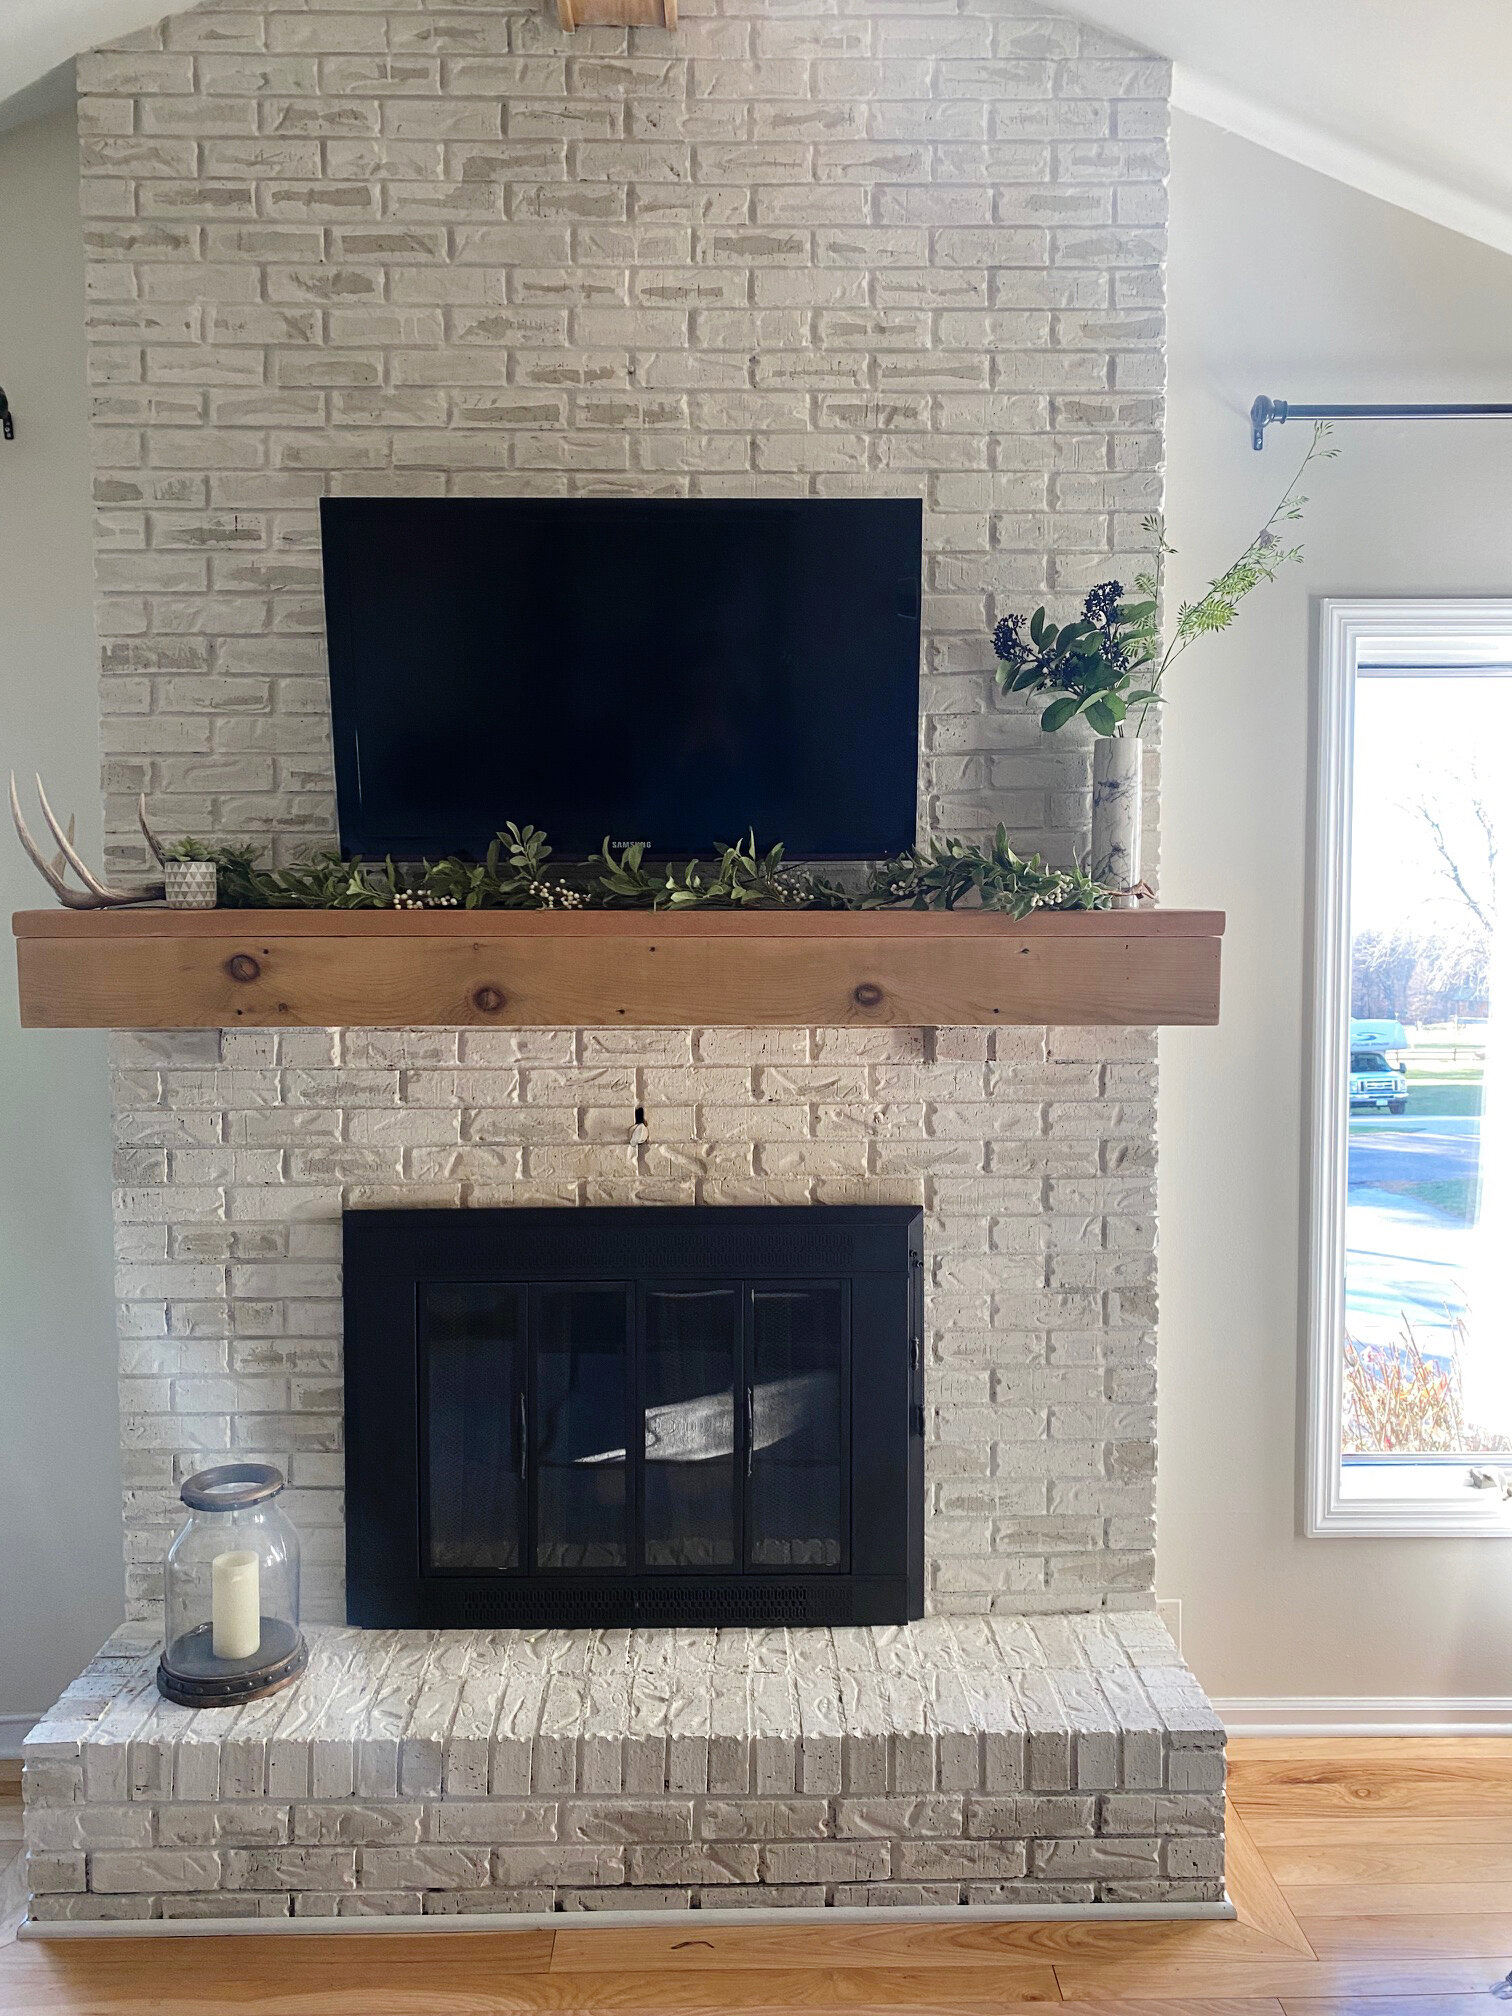 My Painted Brick Fireplace Diy Tutorial, Can You Use Regular Paint On Brick Fireplace